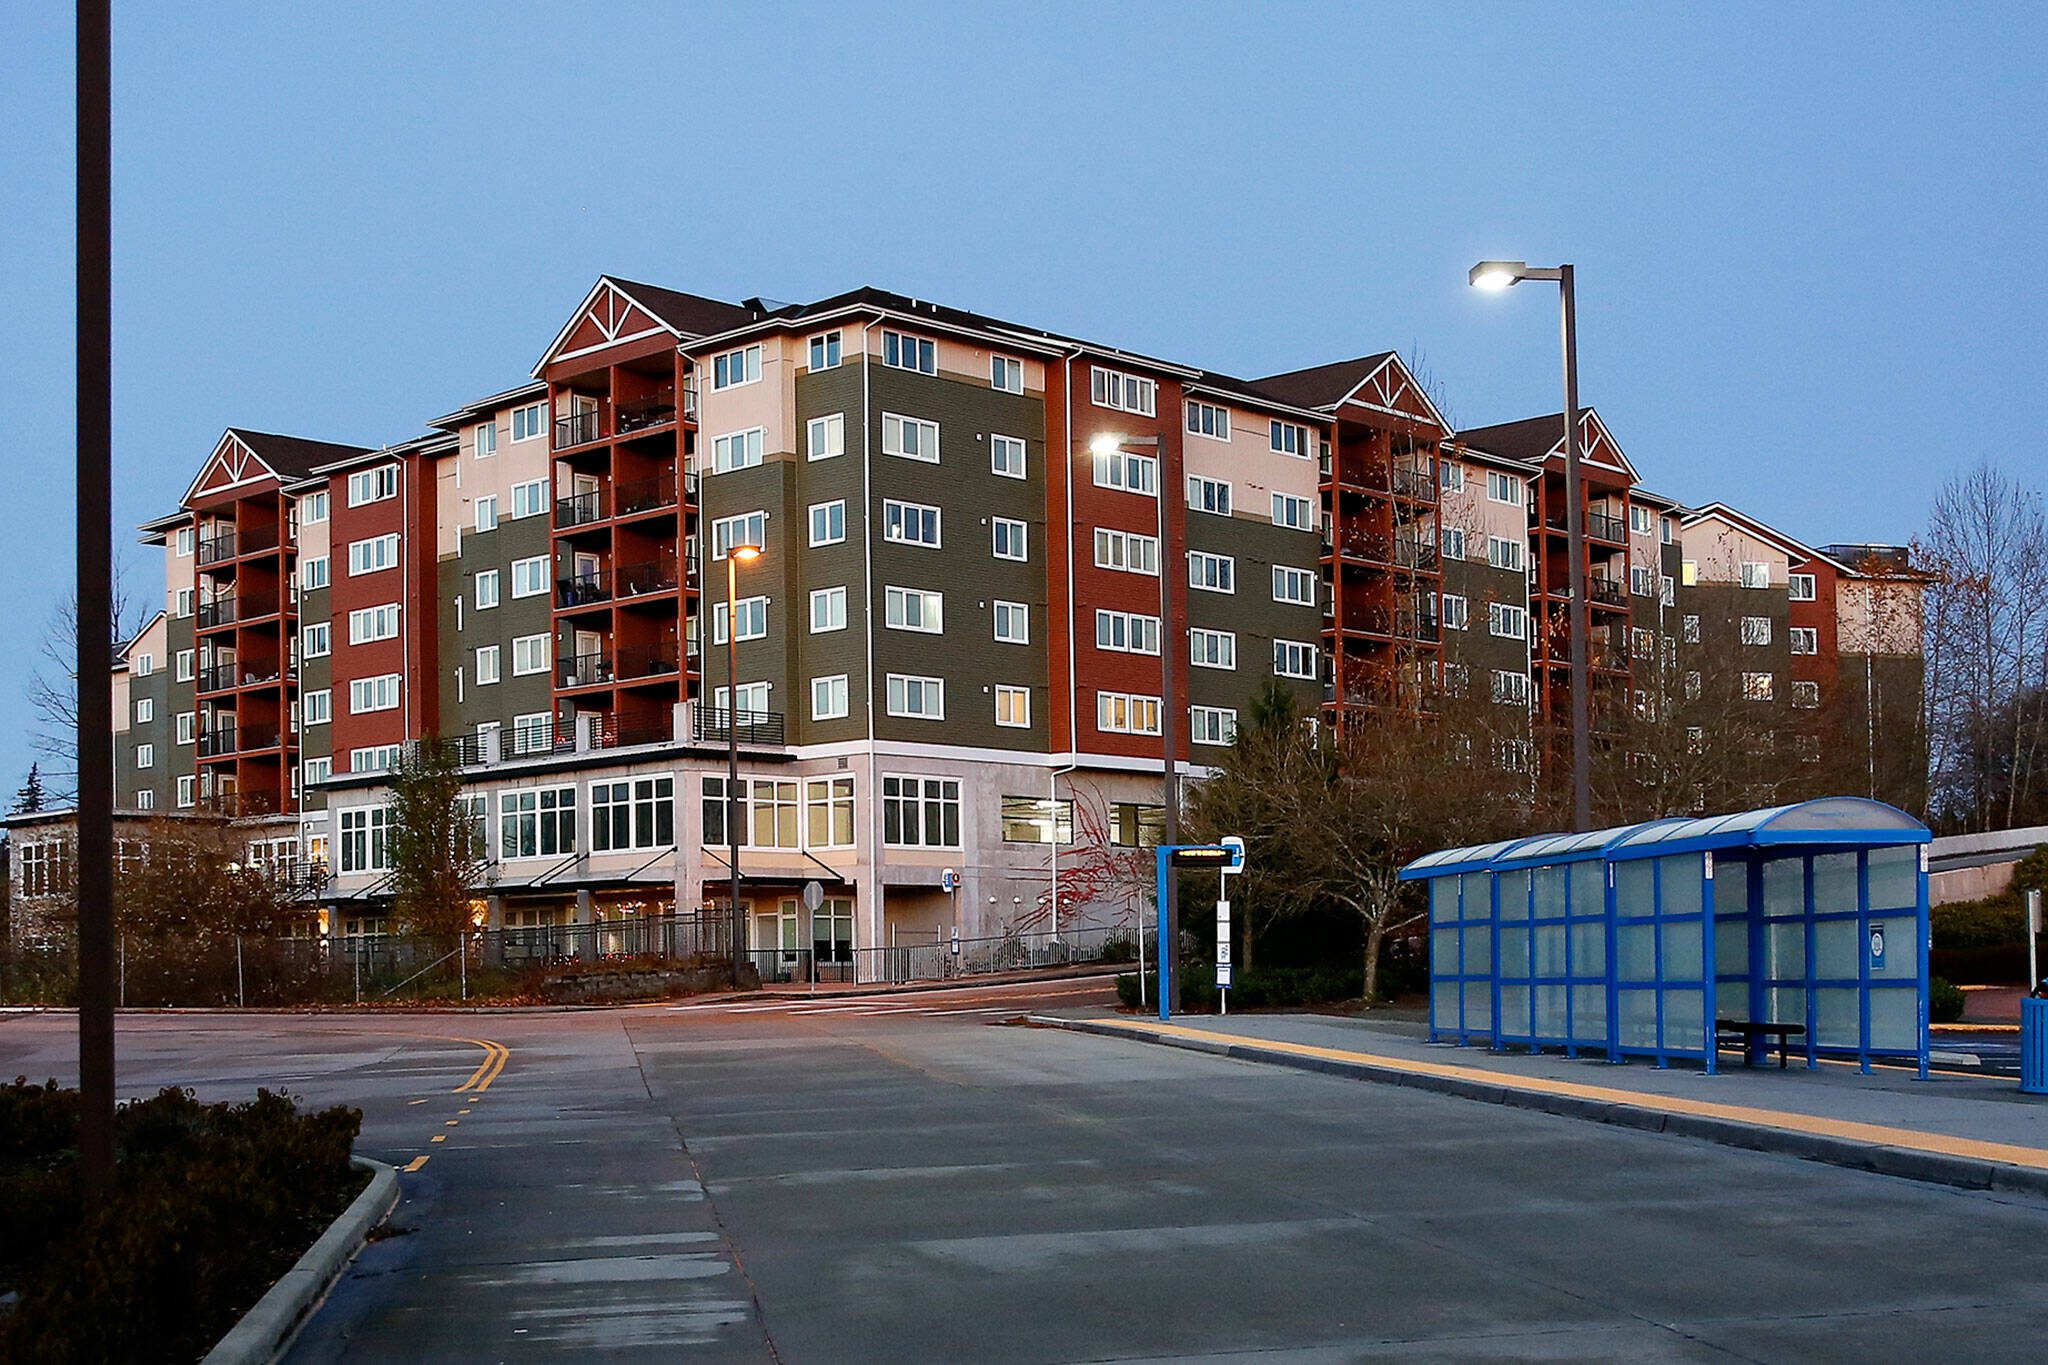 Urban Center Apartments in Lynnwood is an example of housing faround the incoming light rail stations. (Kevin Clark / The Herald)